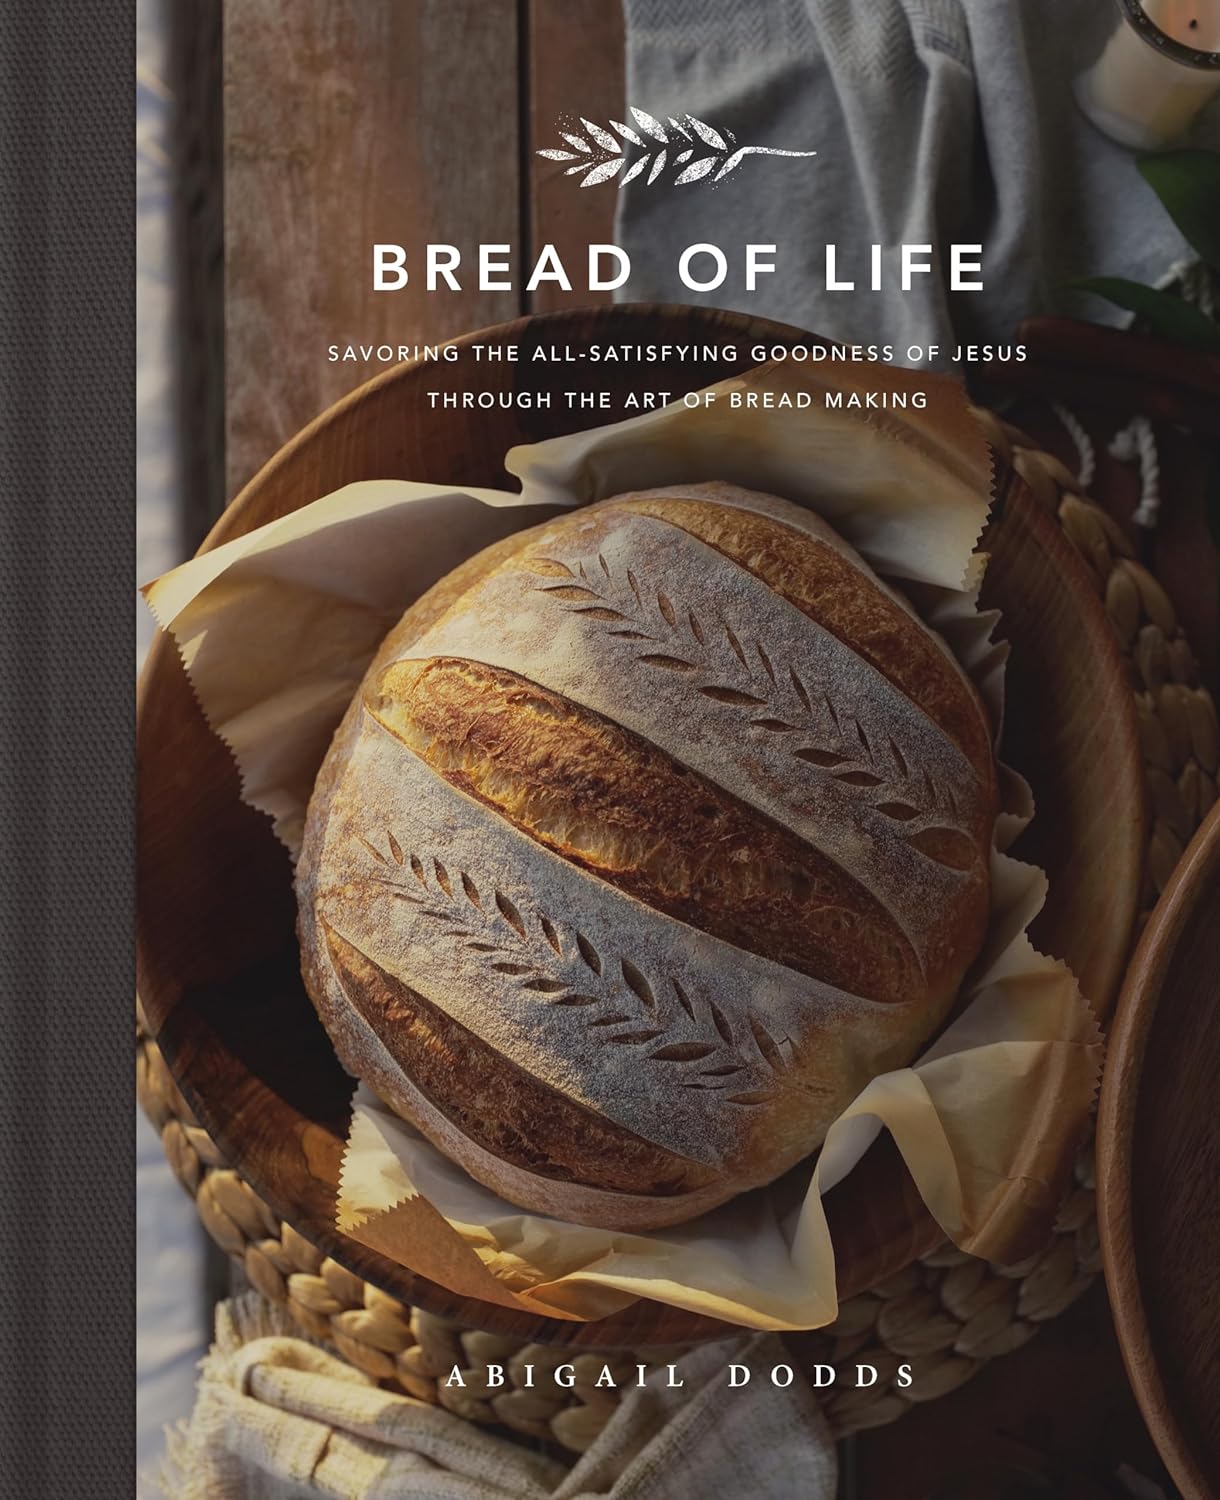 Bread of Life: Savoring the All-Satisfying Goodness of Jesus through the Art of Bread Making     Hardcover – November 9, 2021